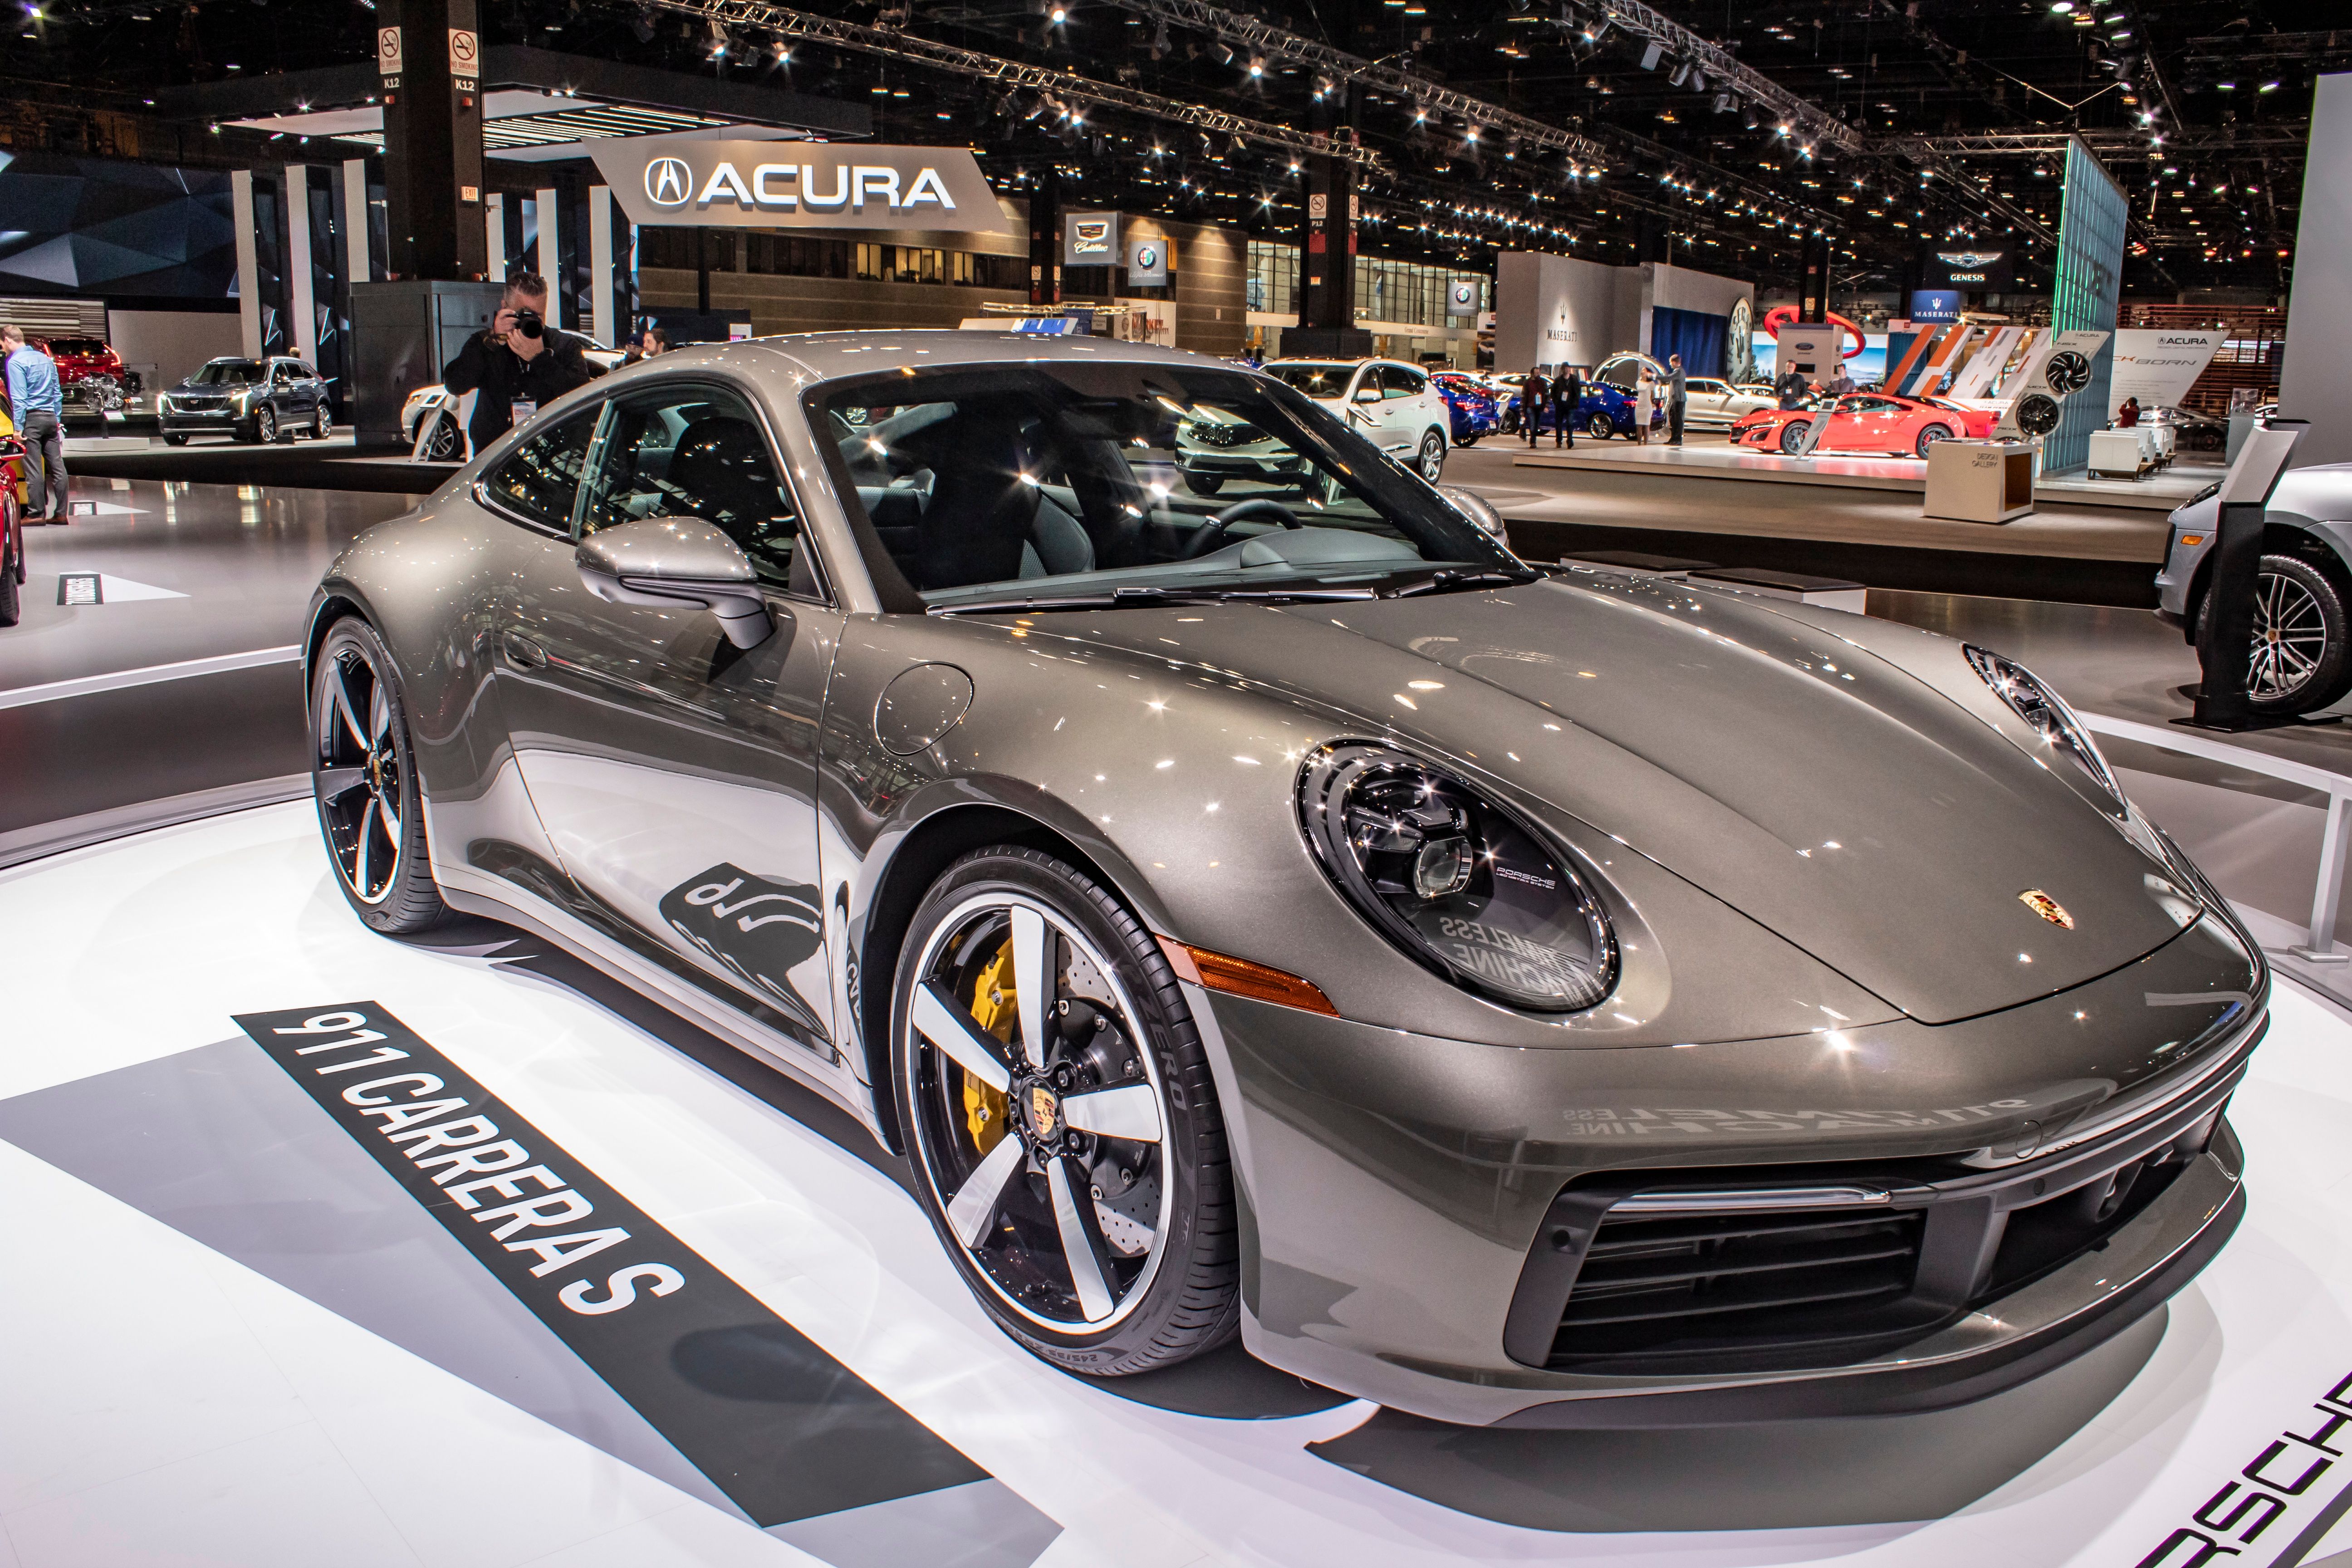 The Porsche 911 Basically Prints Money, and That's Why Porsche Can Sell the Taycan At a Loss For Now